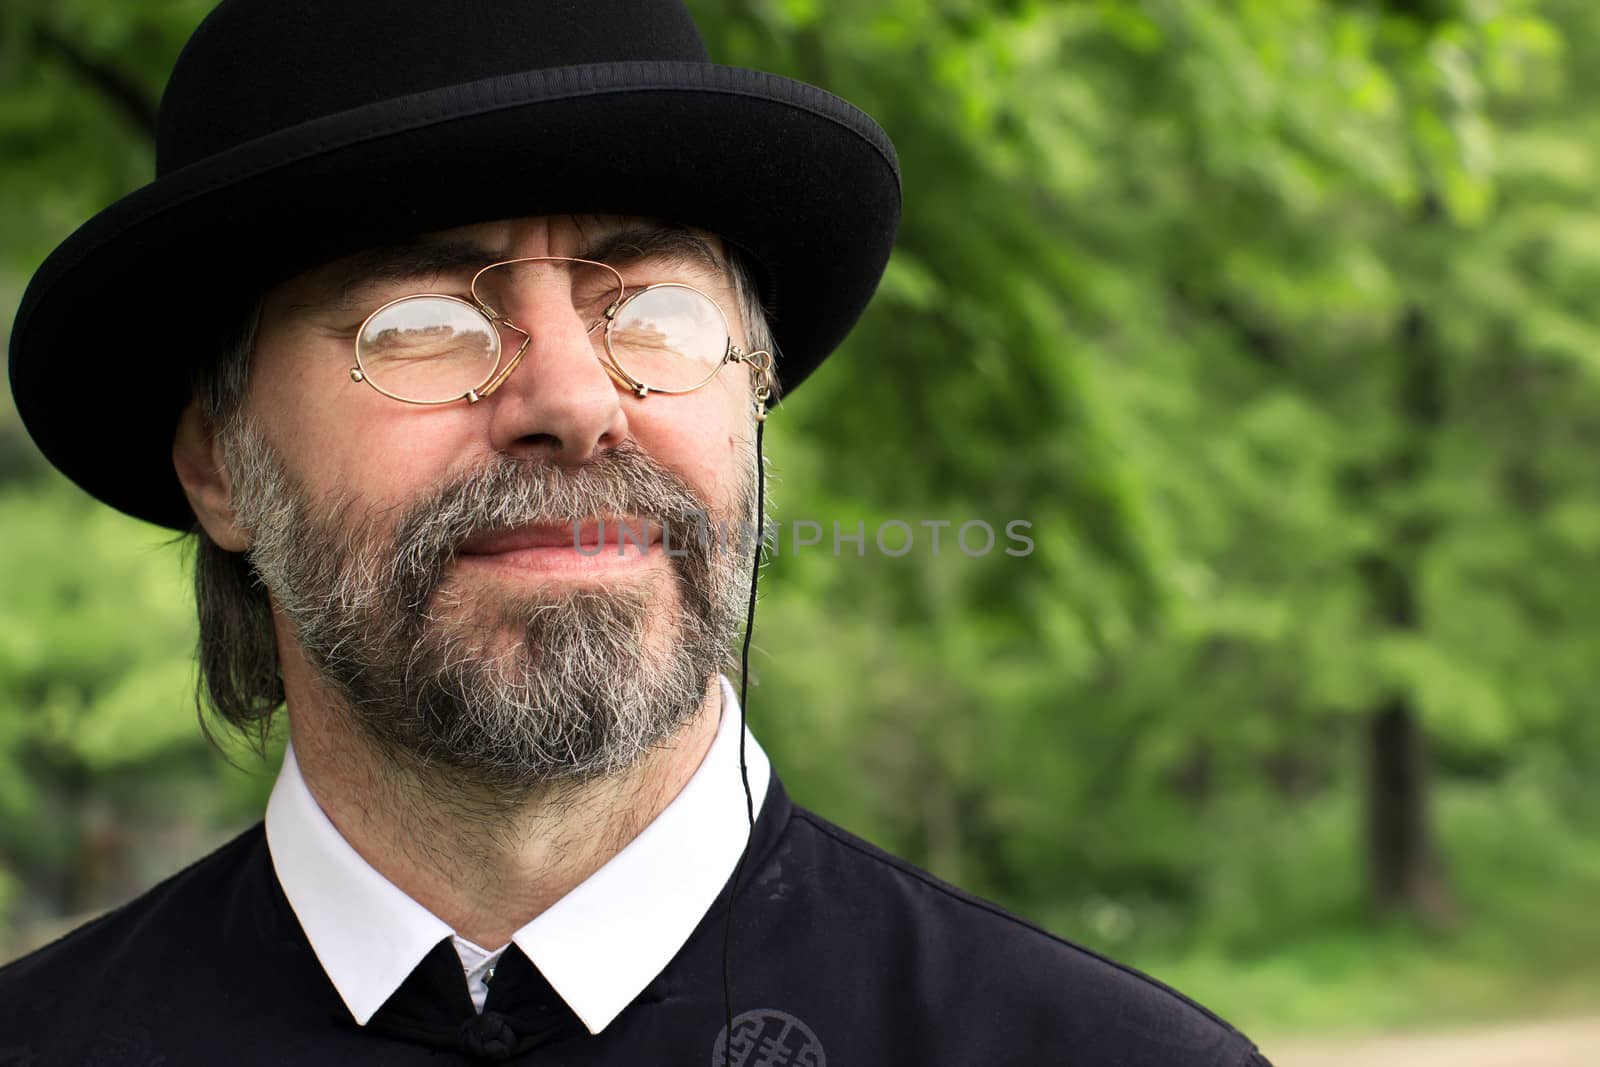 Portrait of a senior businessman, wearing a suit and hat, as well as old fashion eyeglasses. Outdoors.